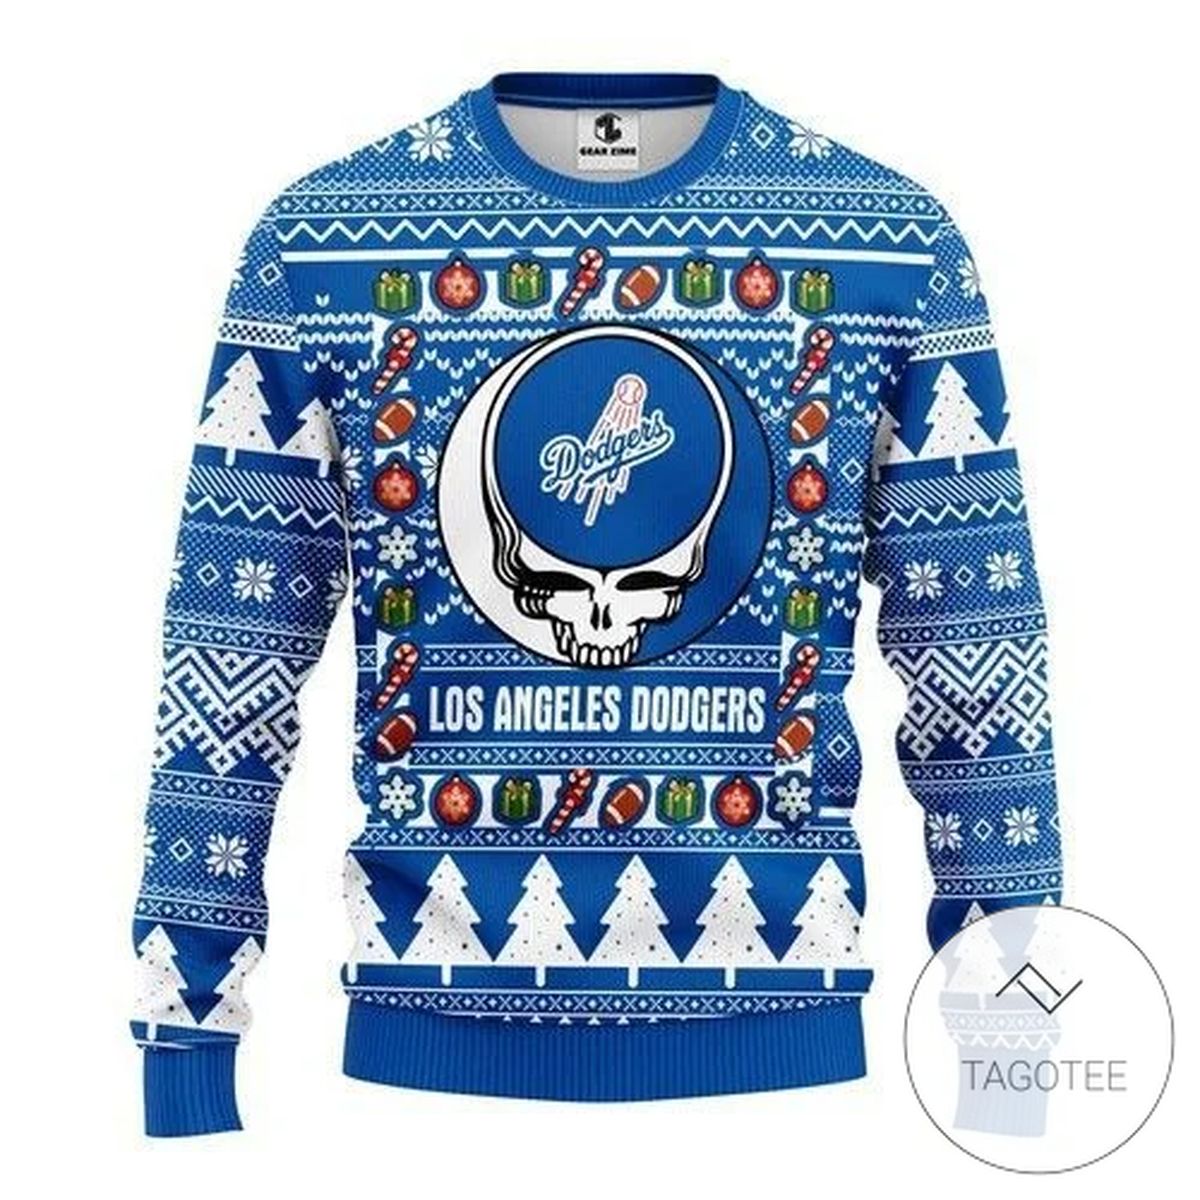 Los Angeles Dodgers Grateful Dead Sweatshirt Knitted Ugly Christmas Sweater